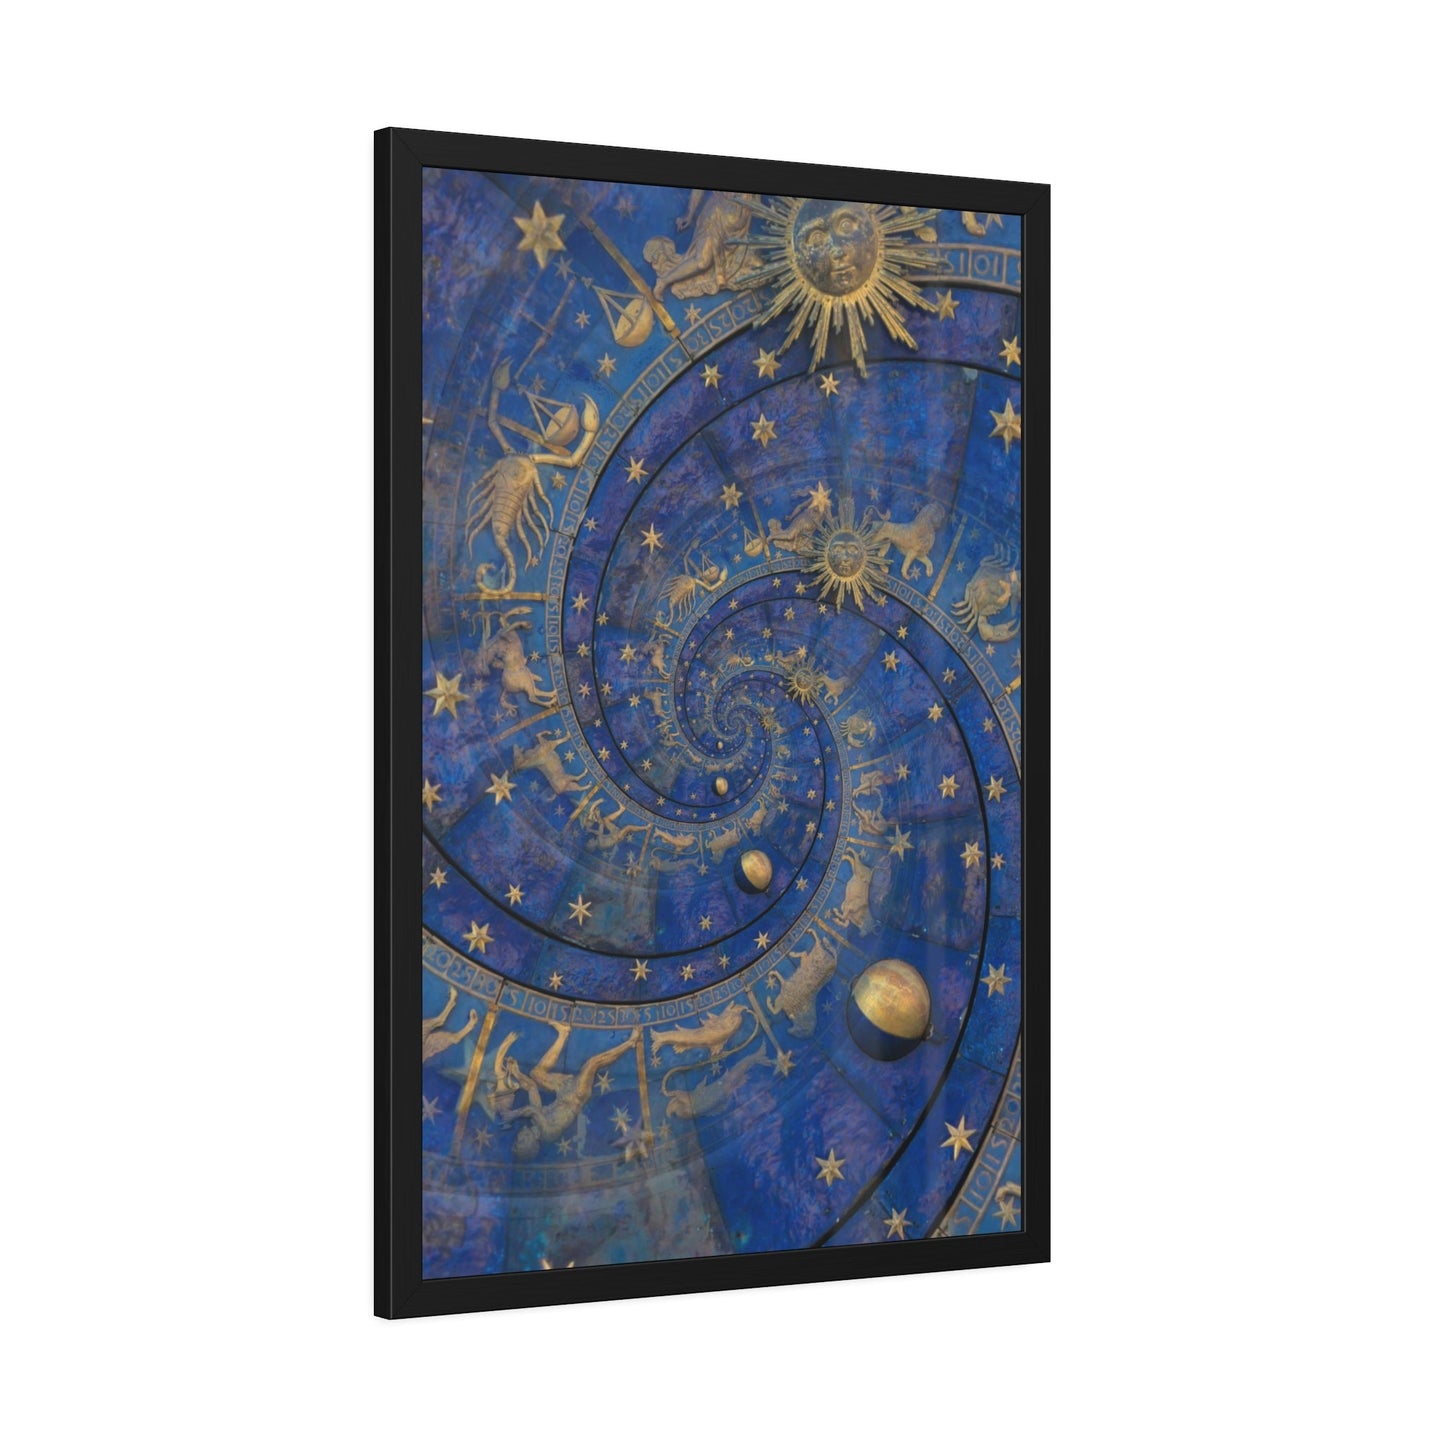 Zodiac Symbols in the Sky: Abstract Framed Poster Art for Home